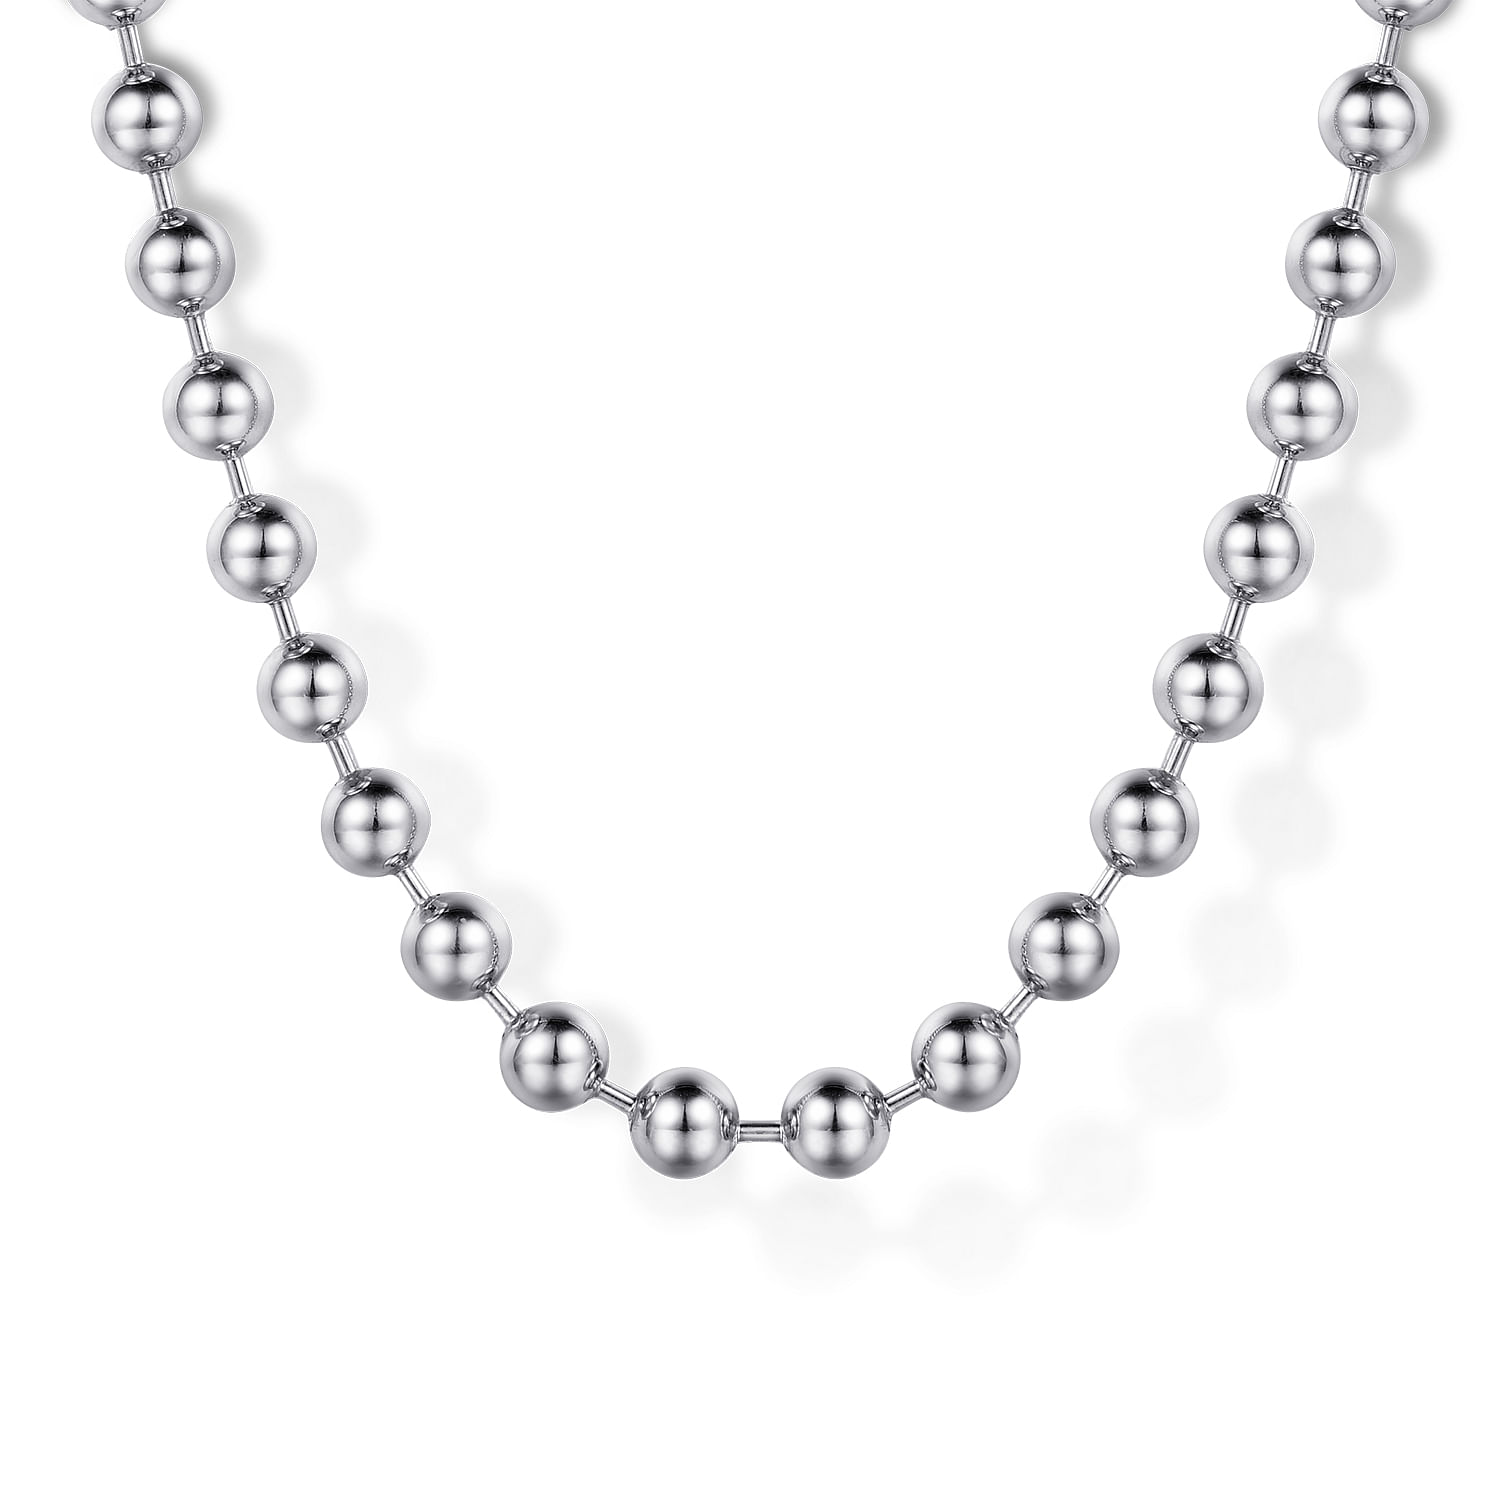 22 Inch 14K White Gold 4mm Ball Chain Necklace